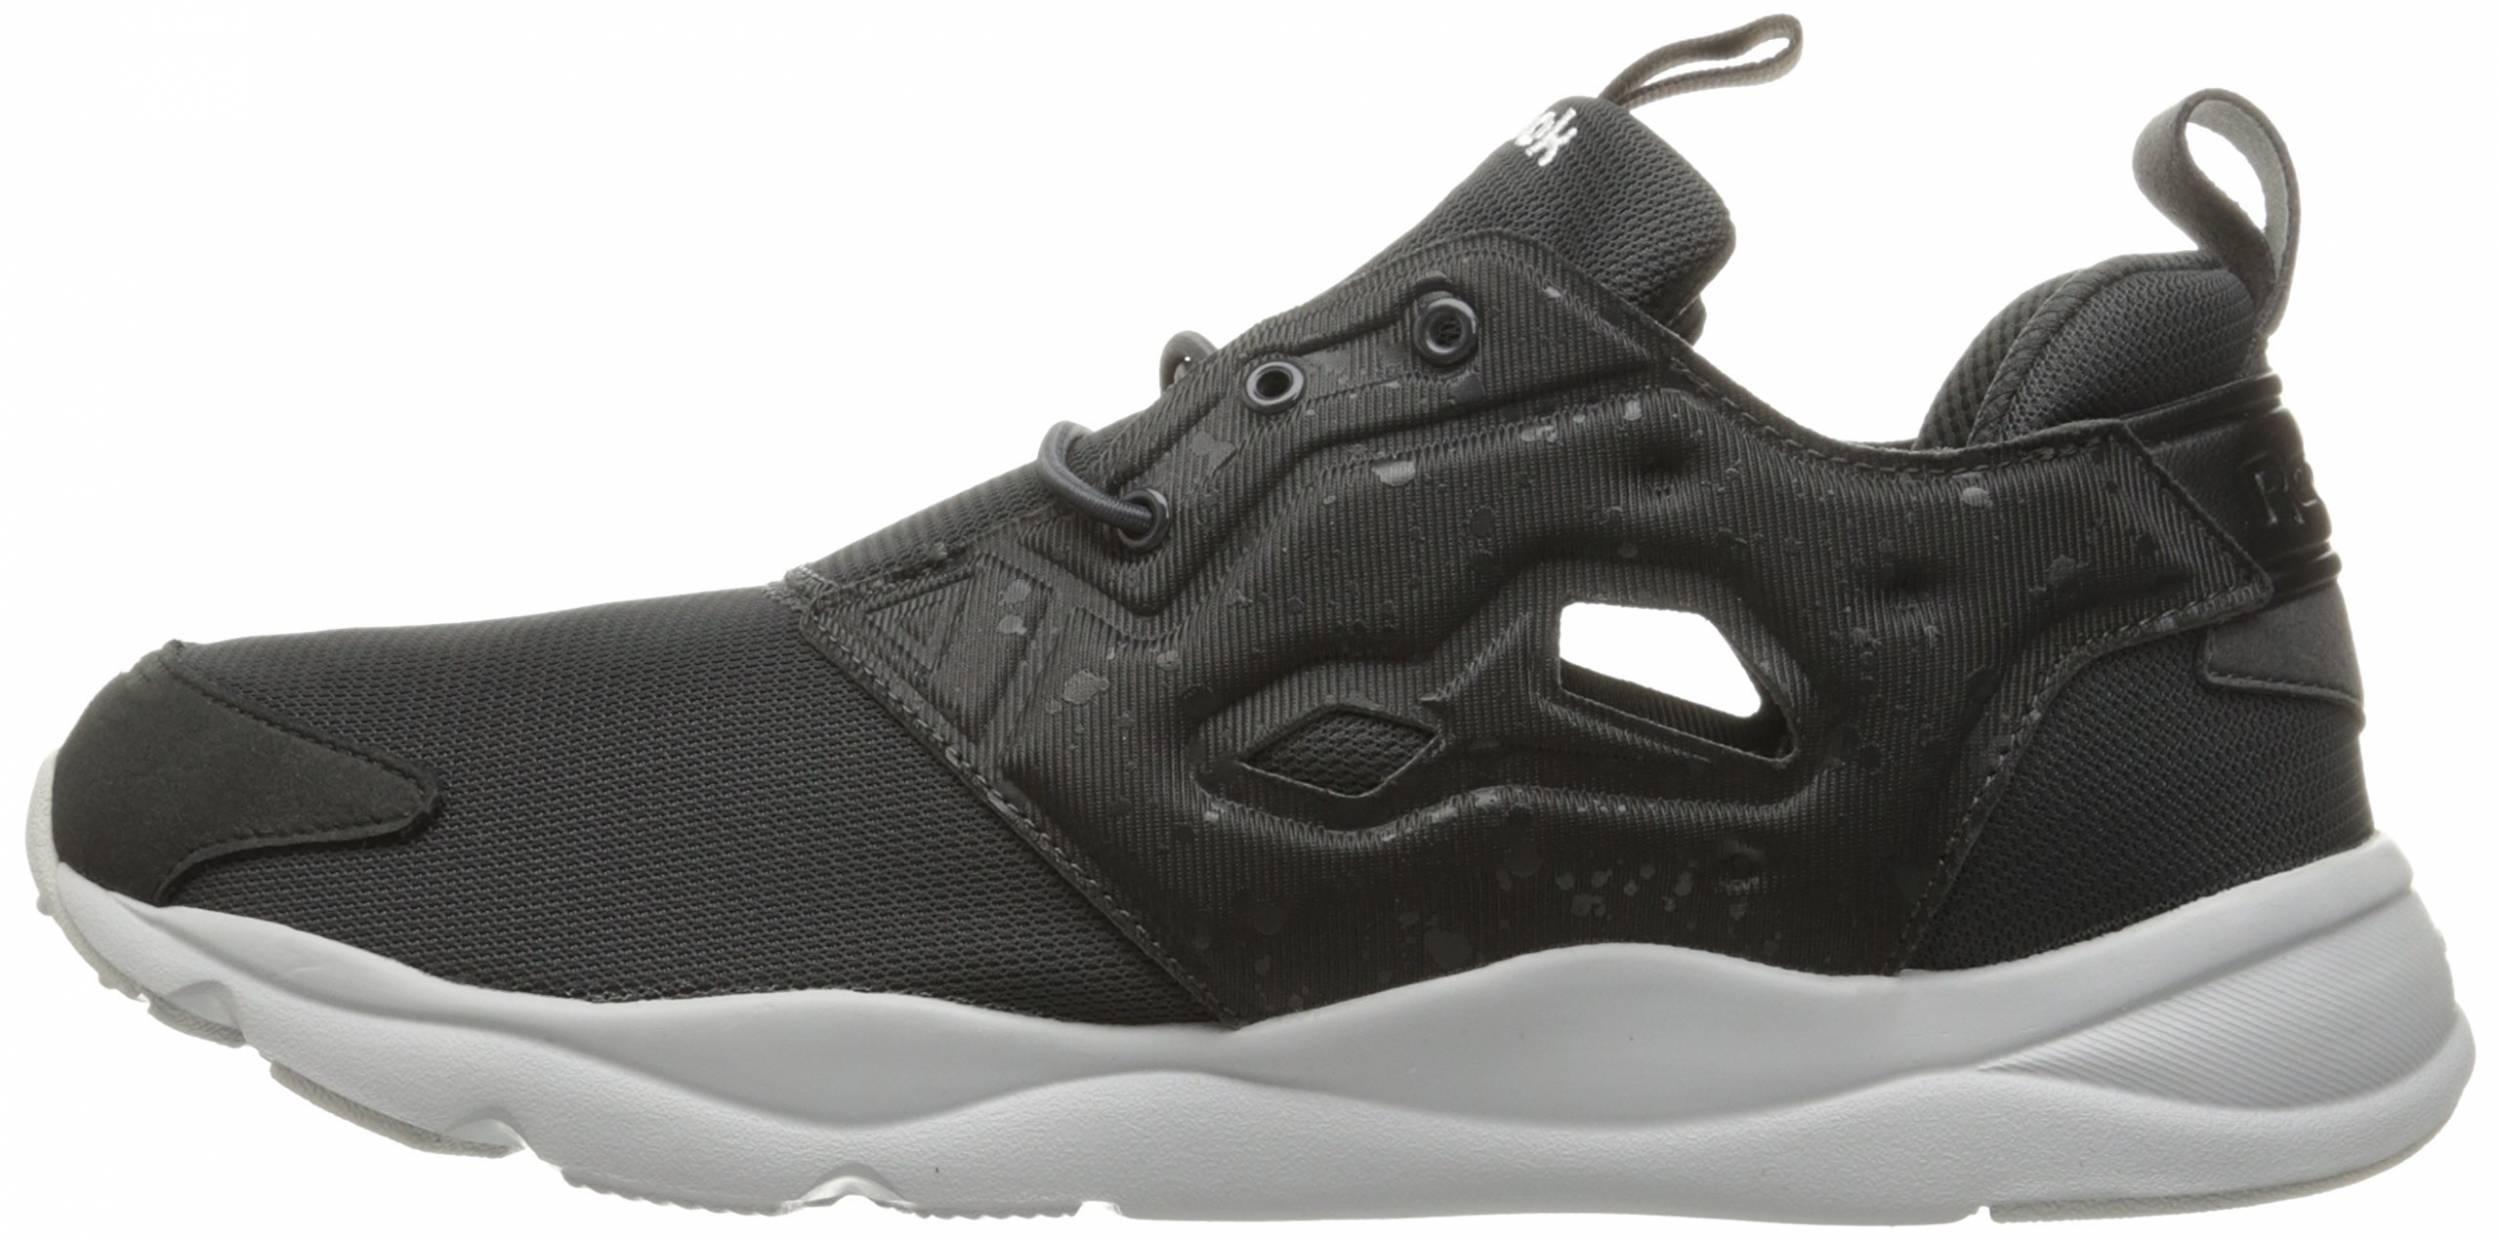 Only $34 + Review of Reebok Furylite SP 